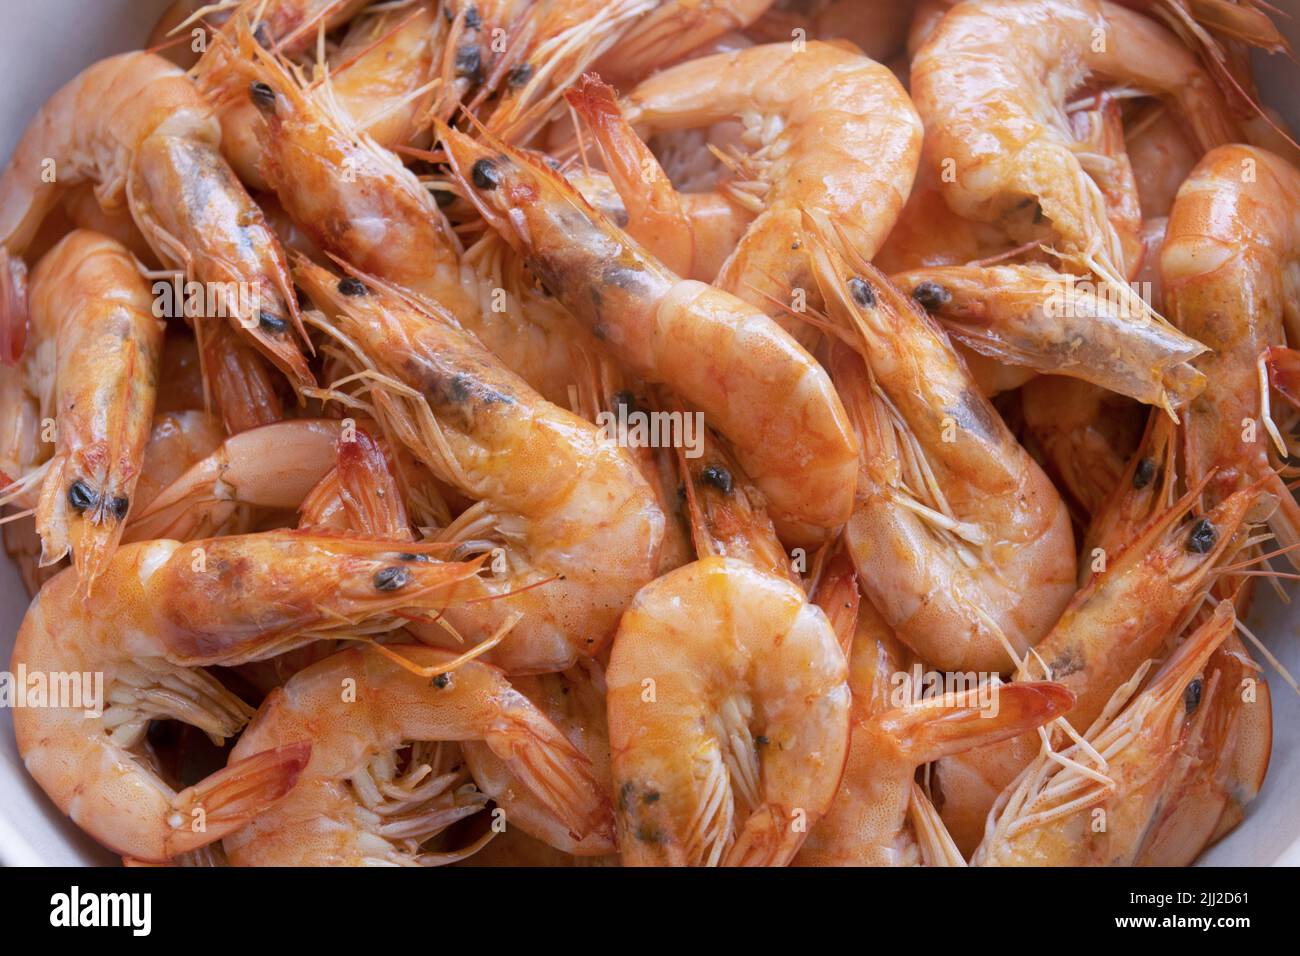 flat lay of fried shrimps in a ceramic bowl Stock Photo